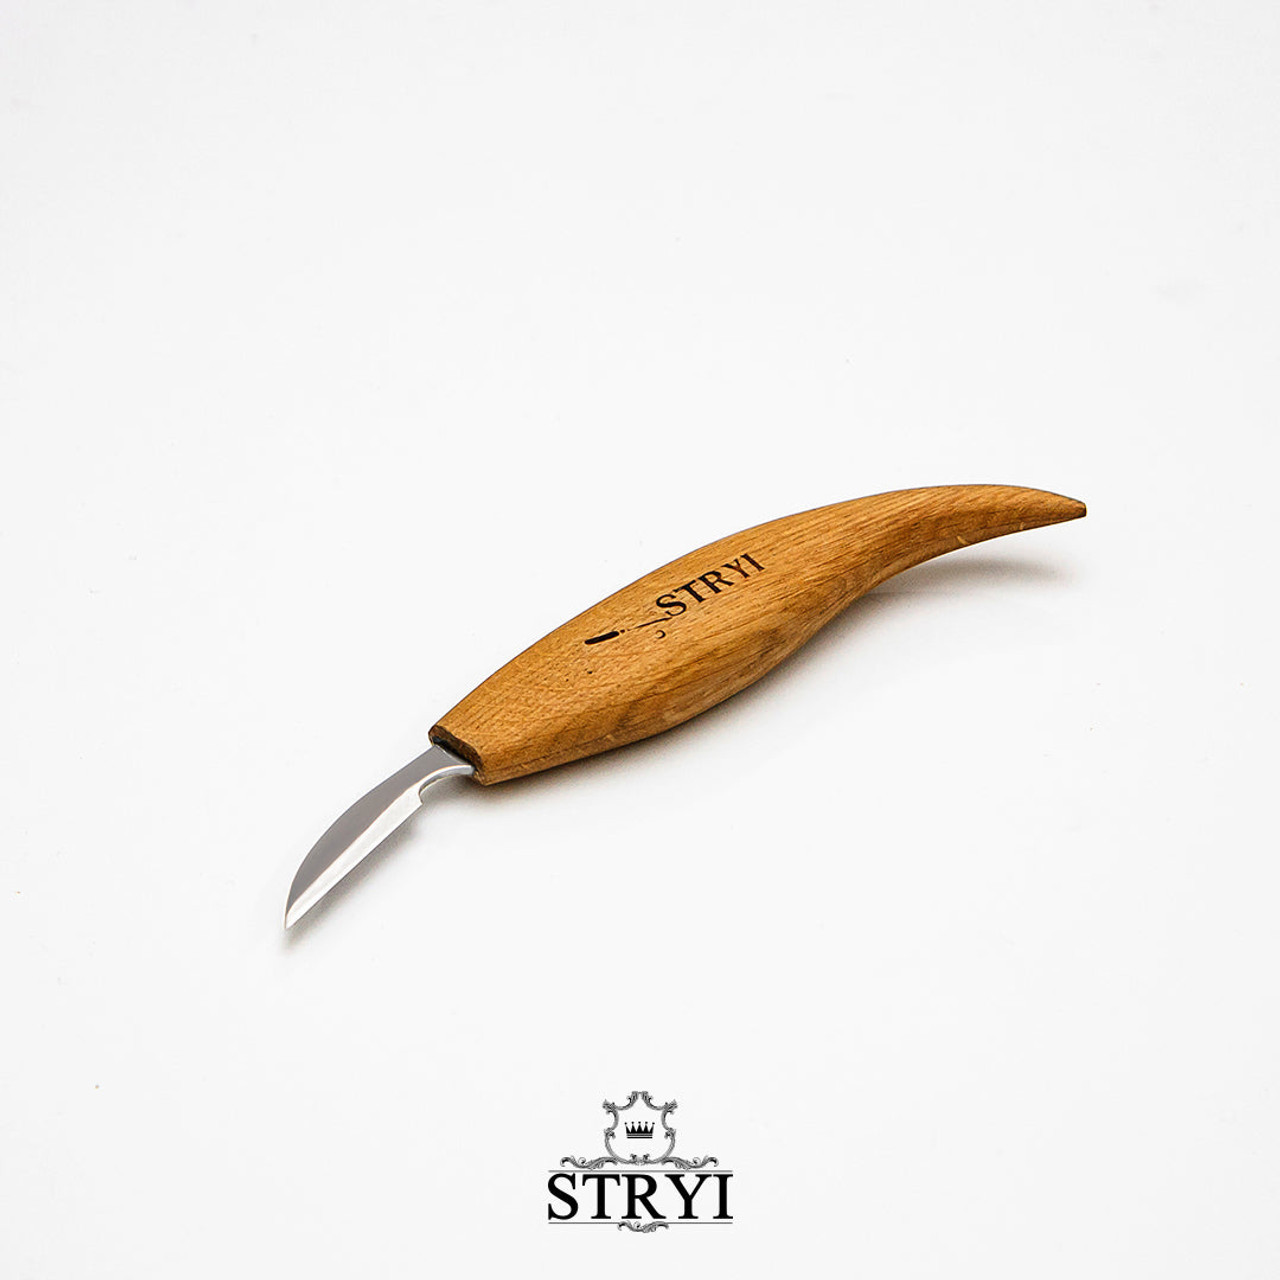 Showing a top view of the Stryi Detail Knife 38mm  blade  and the curvature on the wooden handle.